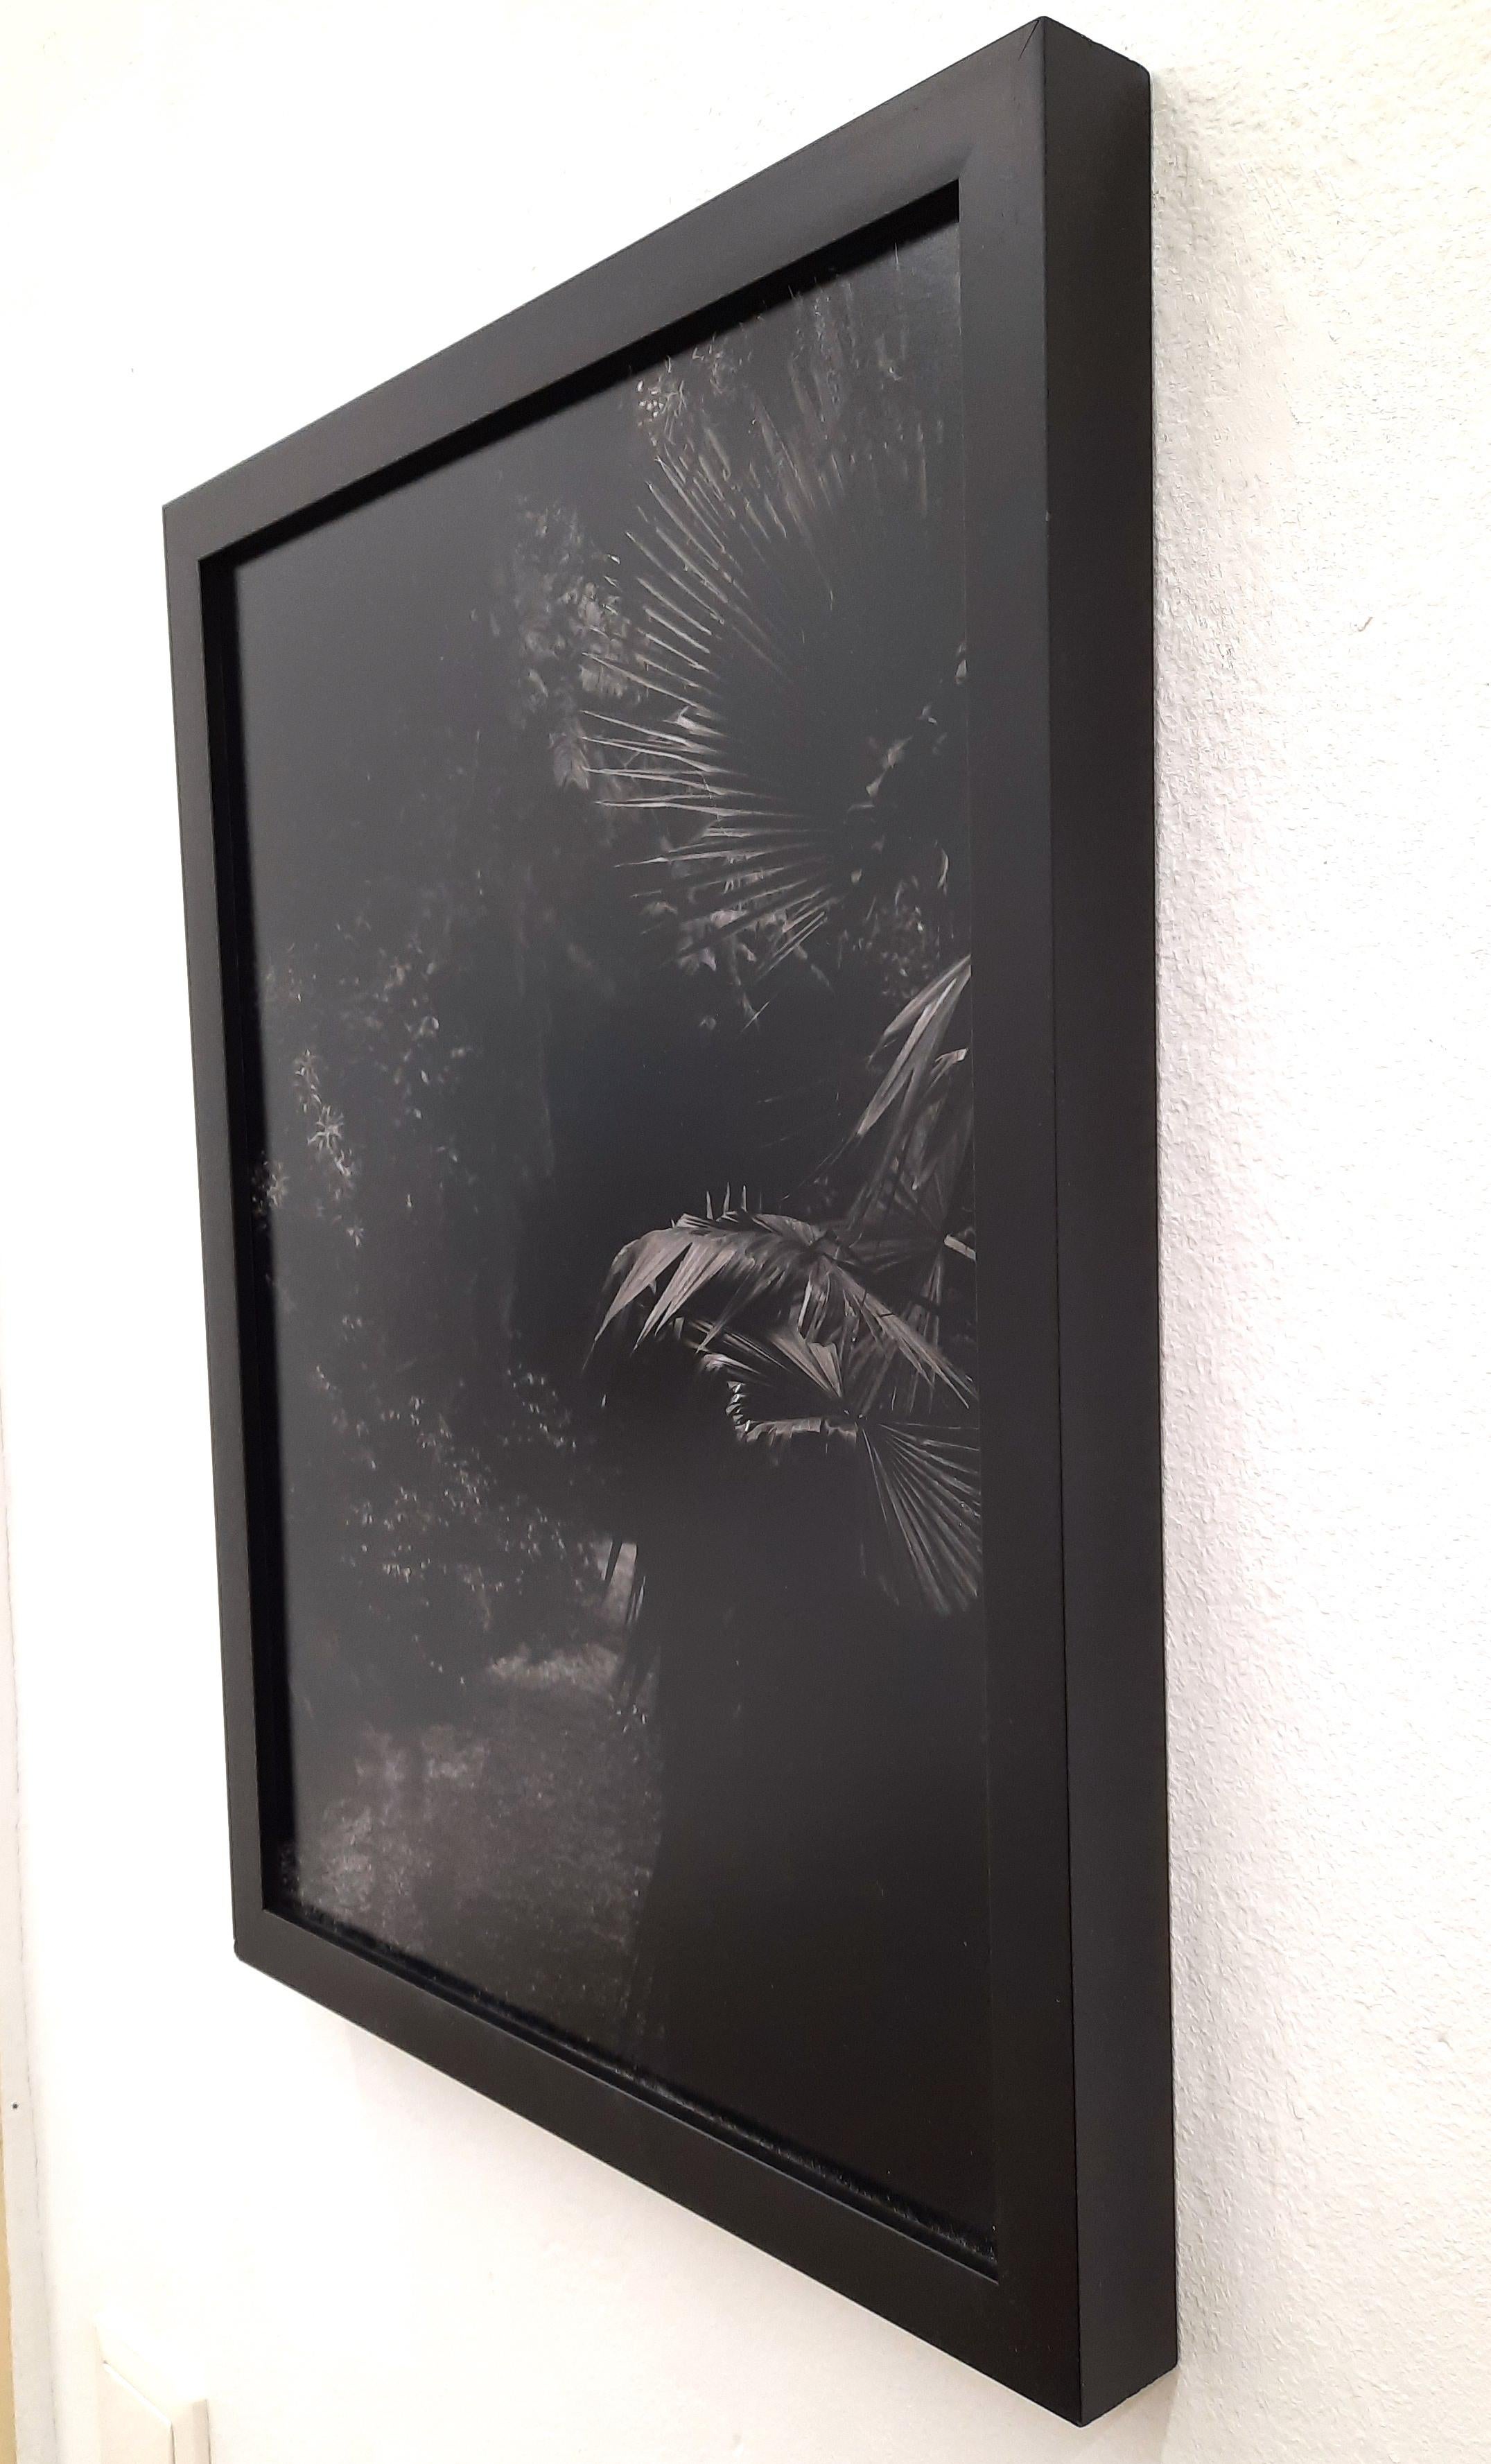 Tina Ribarits
the haunting - Contemporary Dark Landscape Photography
Edition 3/3 + 2 AP
Print is signed and numbered.

Tina Ribarits works with a conceptual approach in a variety of media including installation, video and photography to create